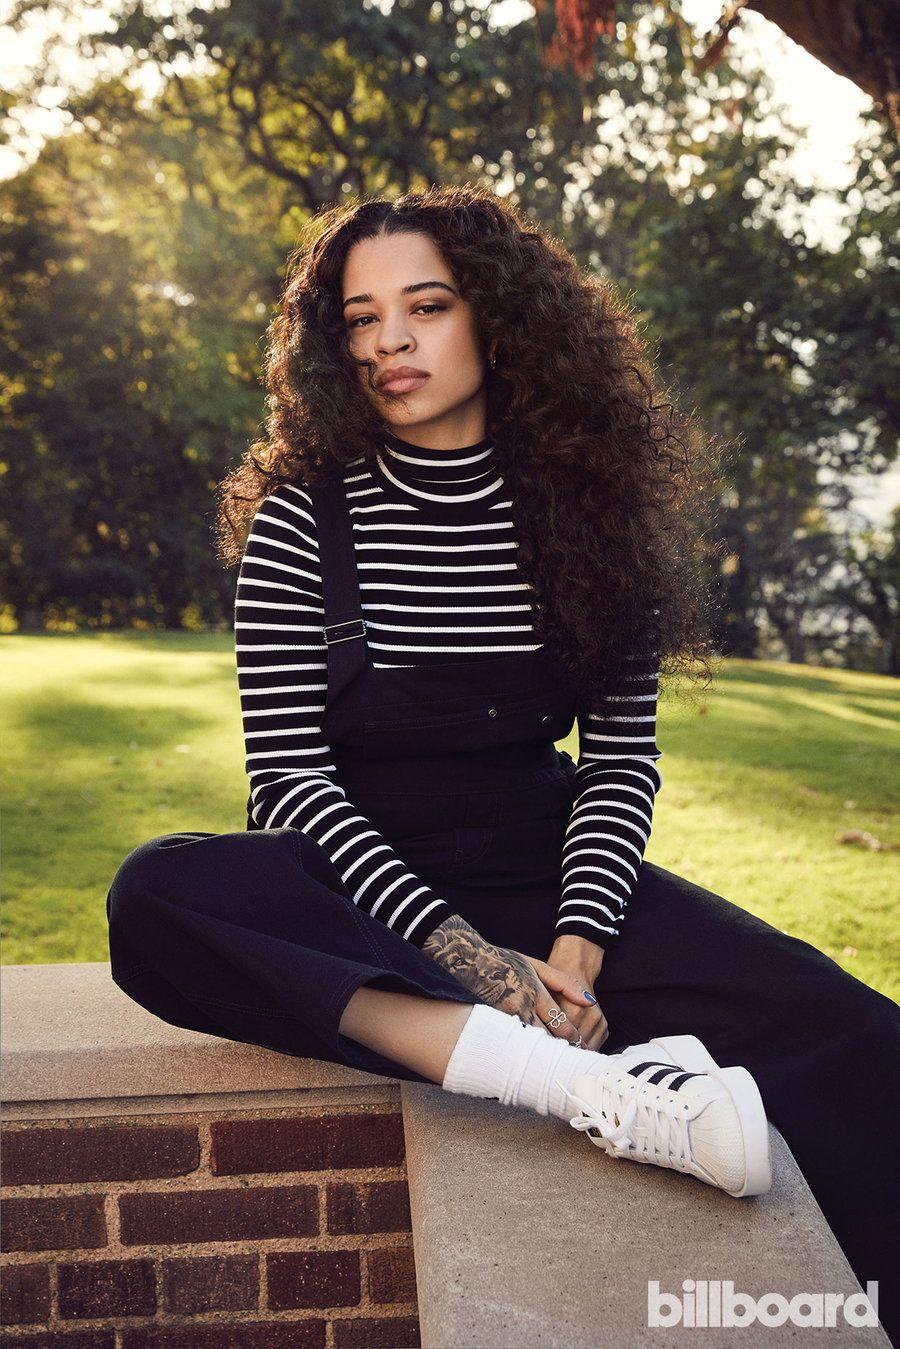 Download wallpapers Ella Mai 4k blue neon lights british singer music  stars creative Ella Mai Howell british celebrity superstars Ella Mai  4K for desktop with resolution 3840x2400 High Quality HD pictures  wallpapers